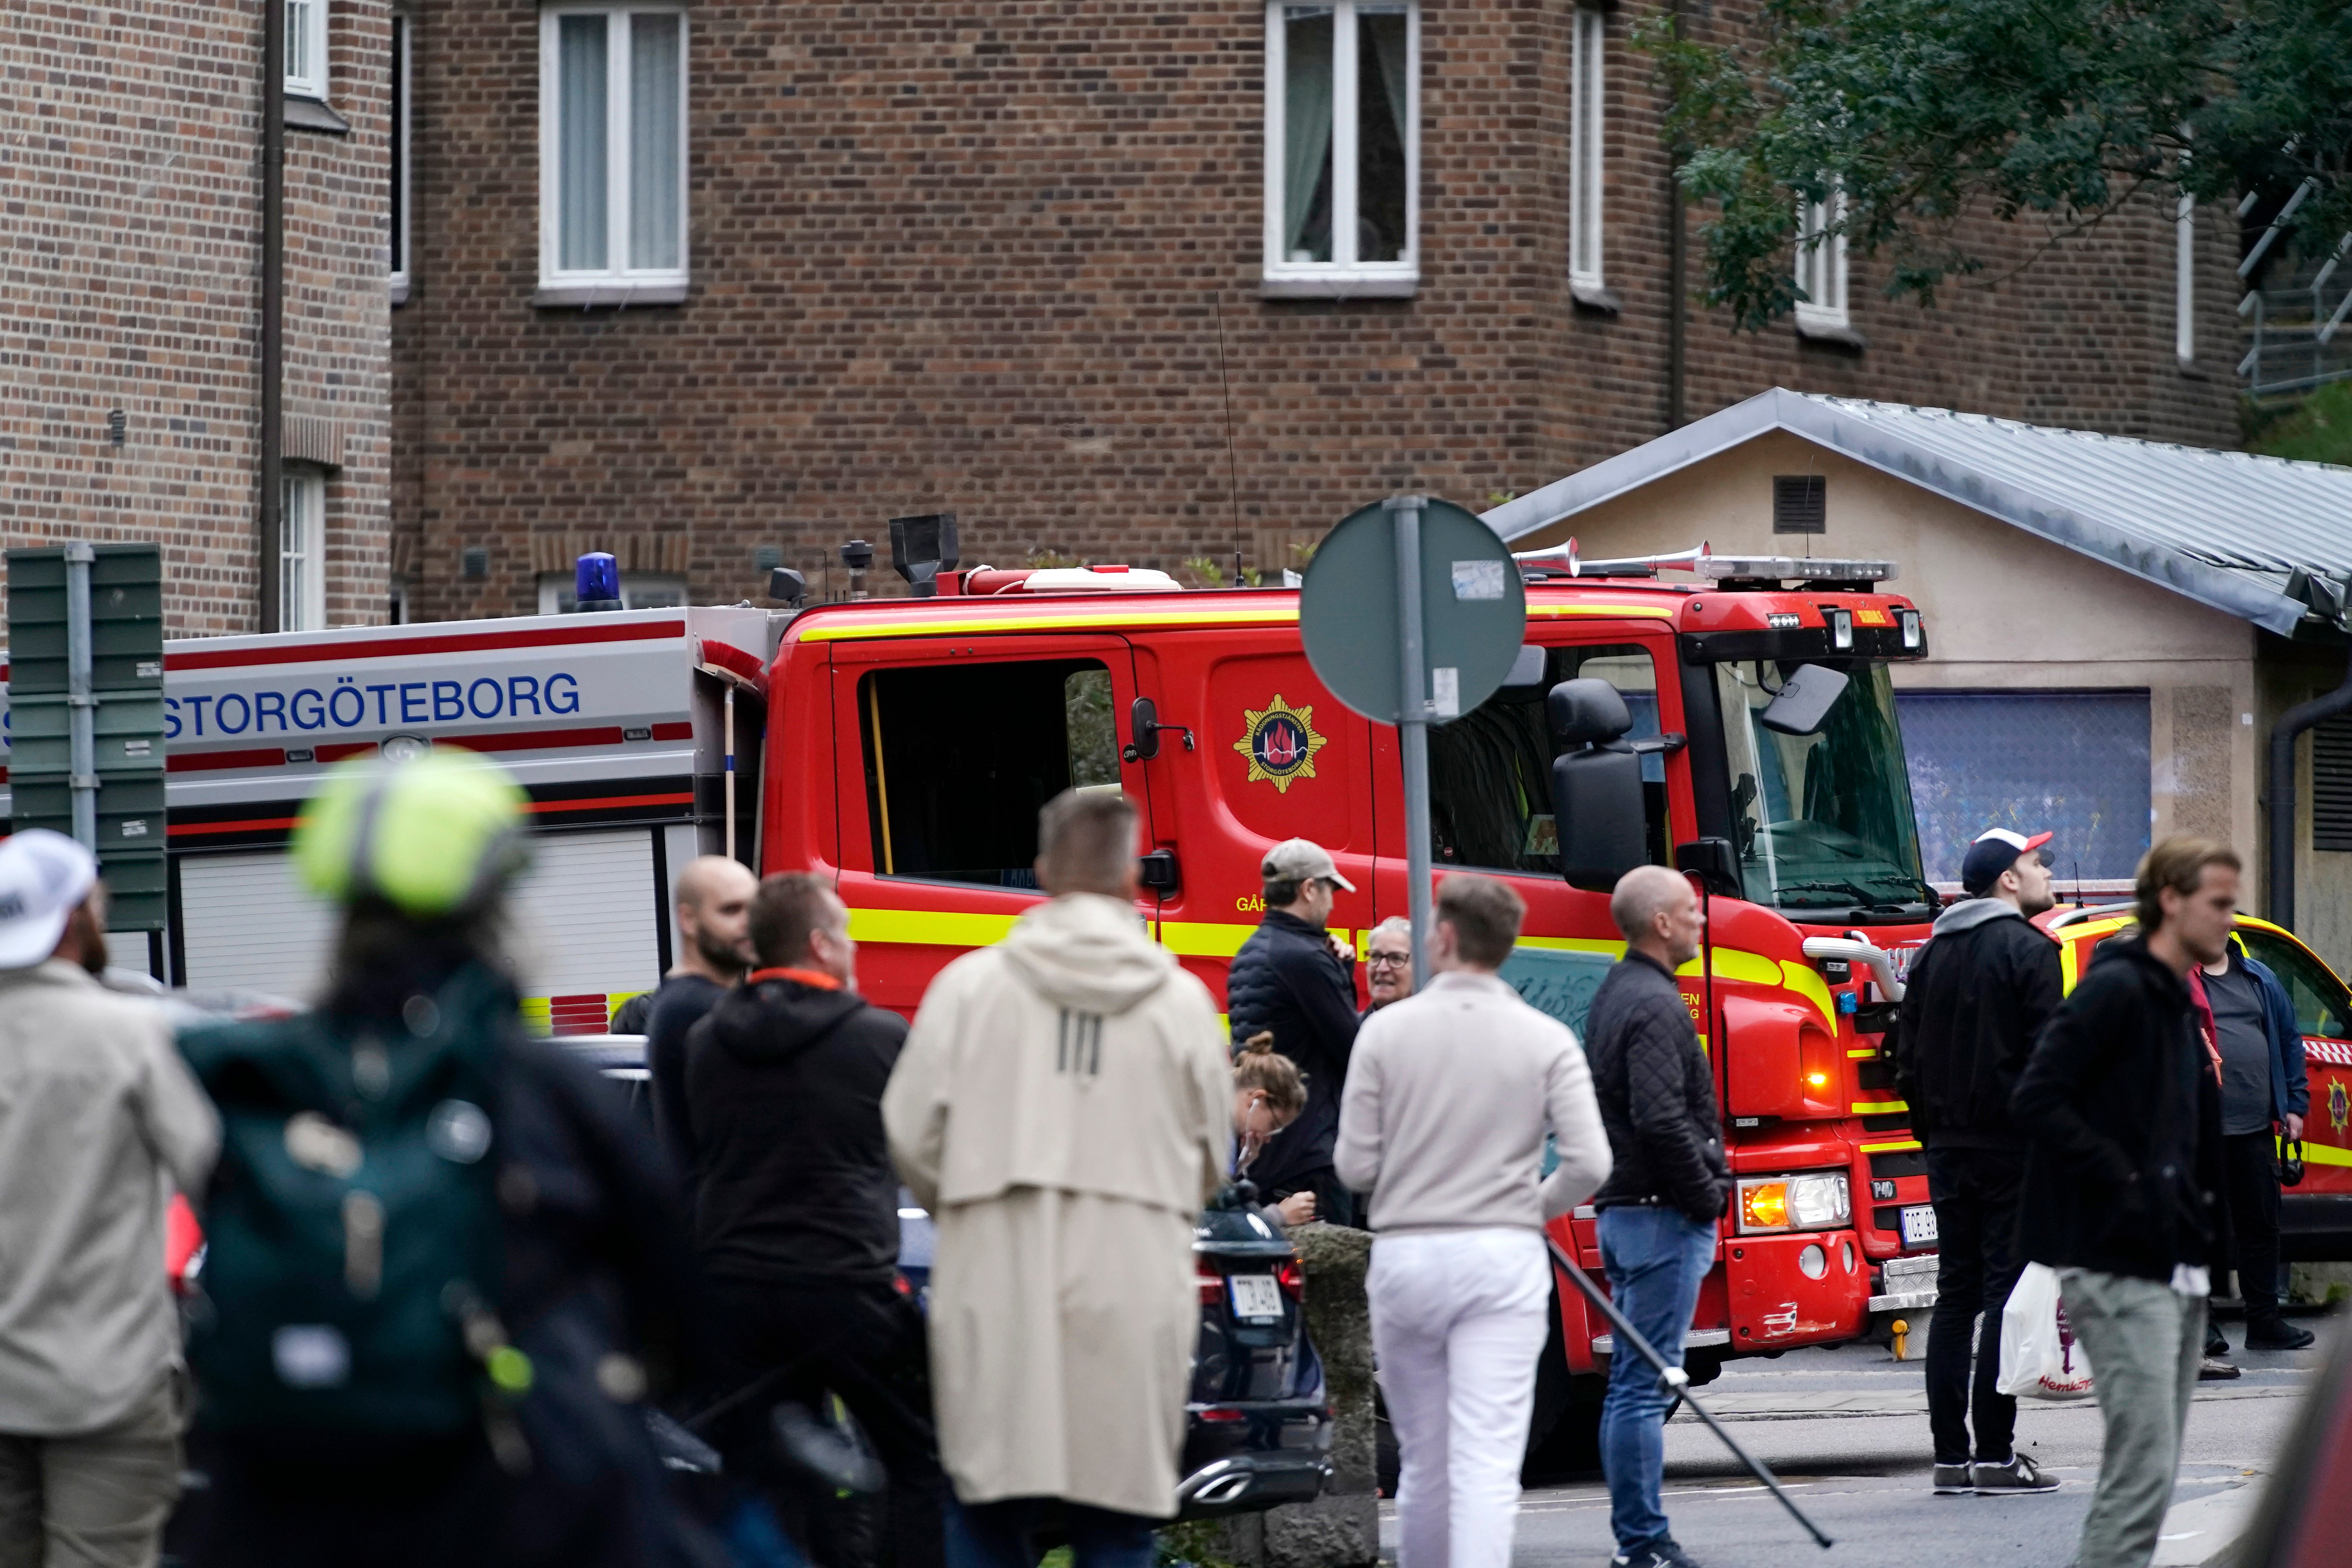 A fire-engine is seen at the area around a health centre that was cordoned off by police in Gothenburg on Thursday